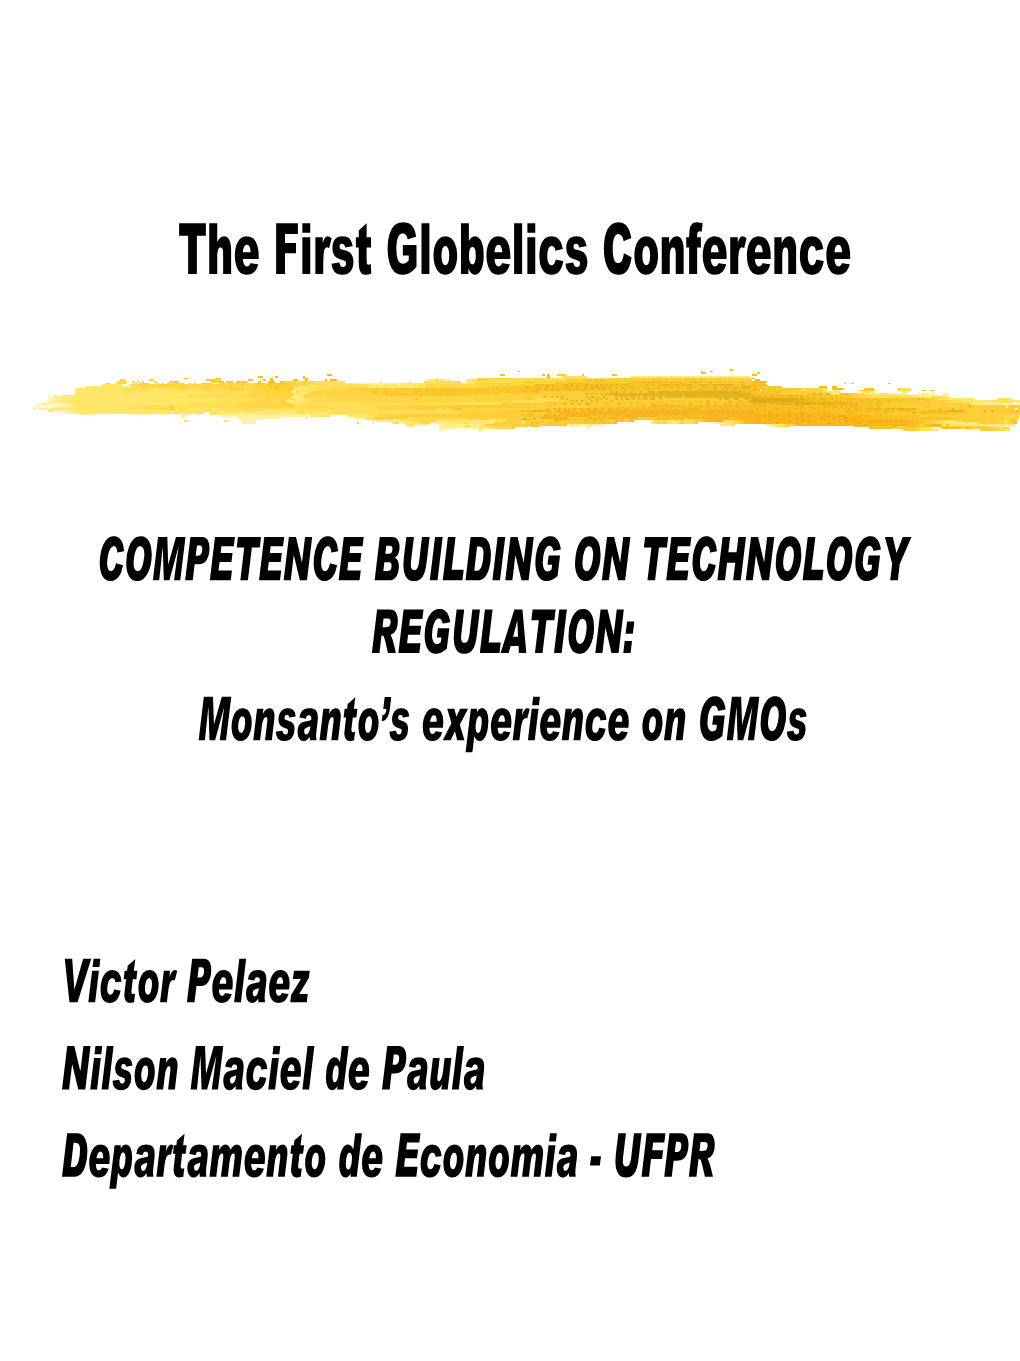 Competence Building on Technology Regulation: Monsanto's Experience on Gmos